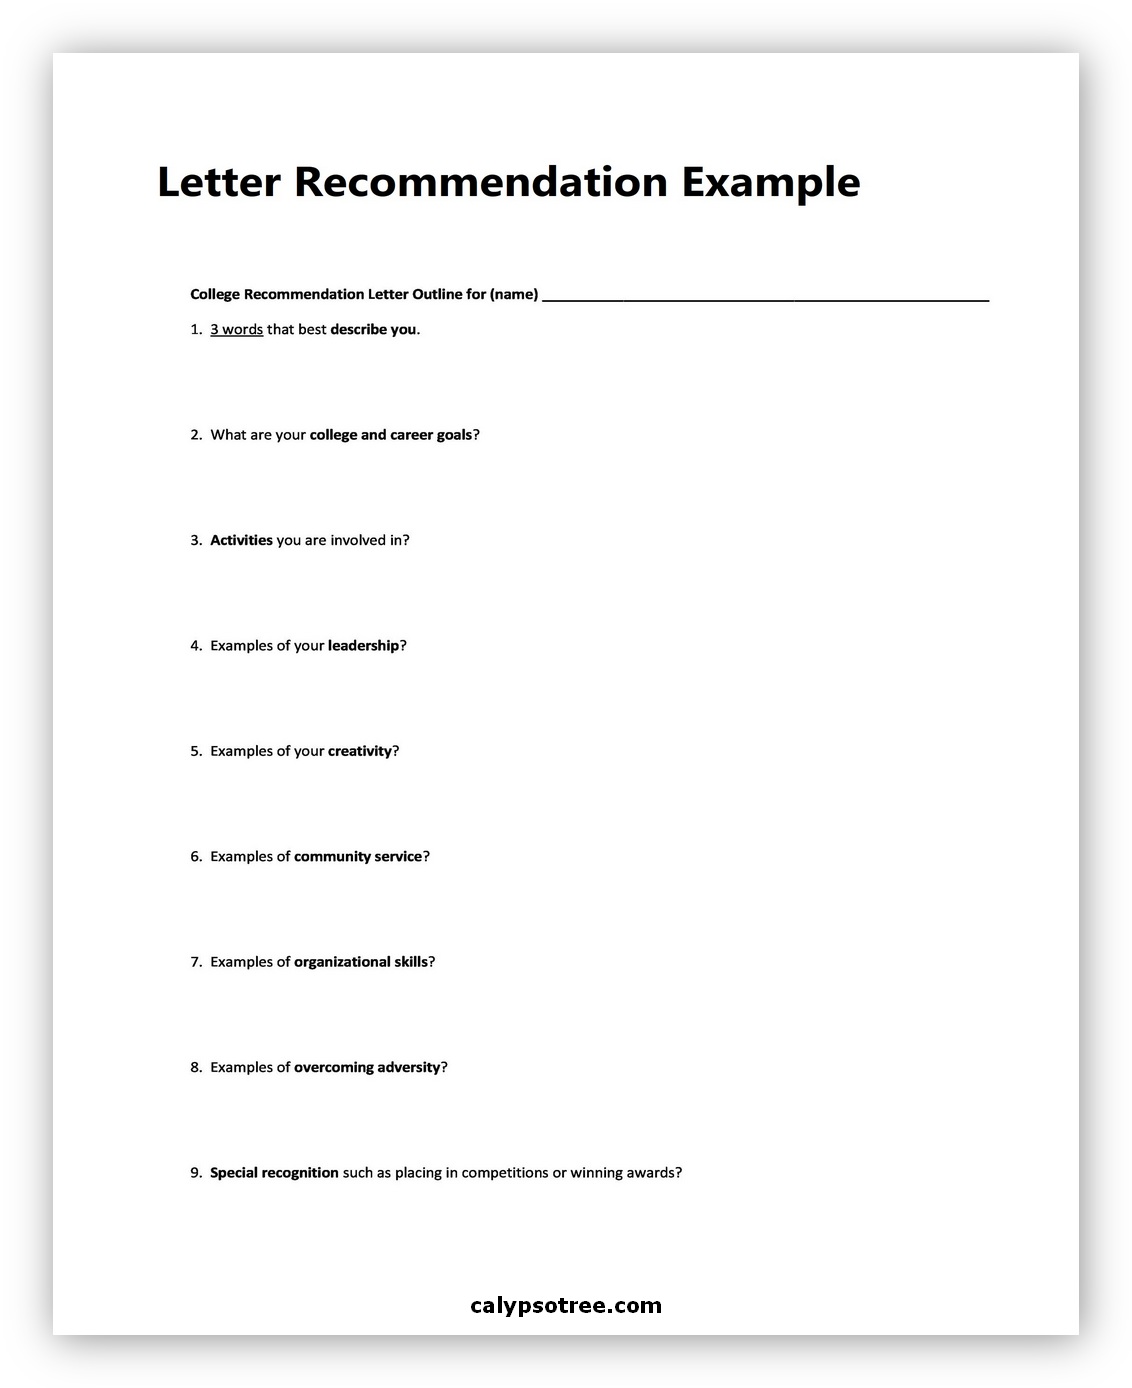 Letter Recommendation Example 08